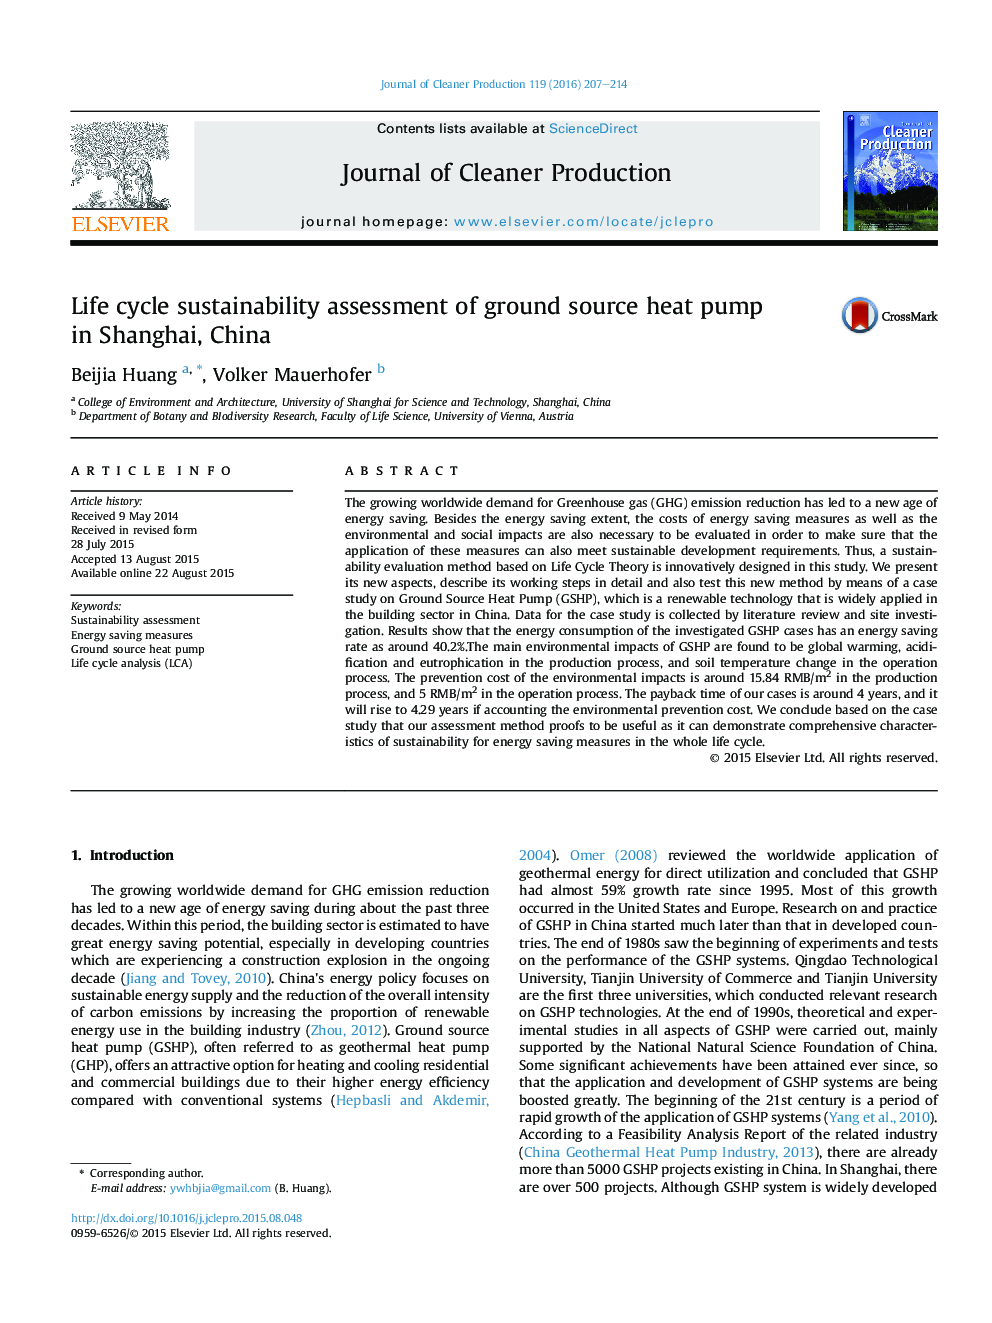 Life cycle sustainability assessment of ground source heat pump in Shanghai, China